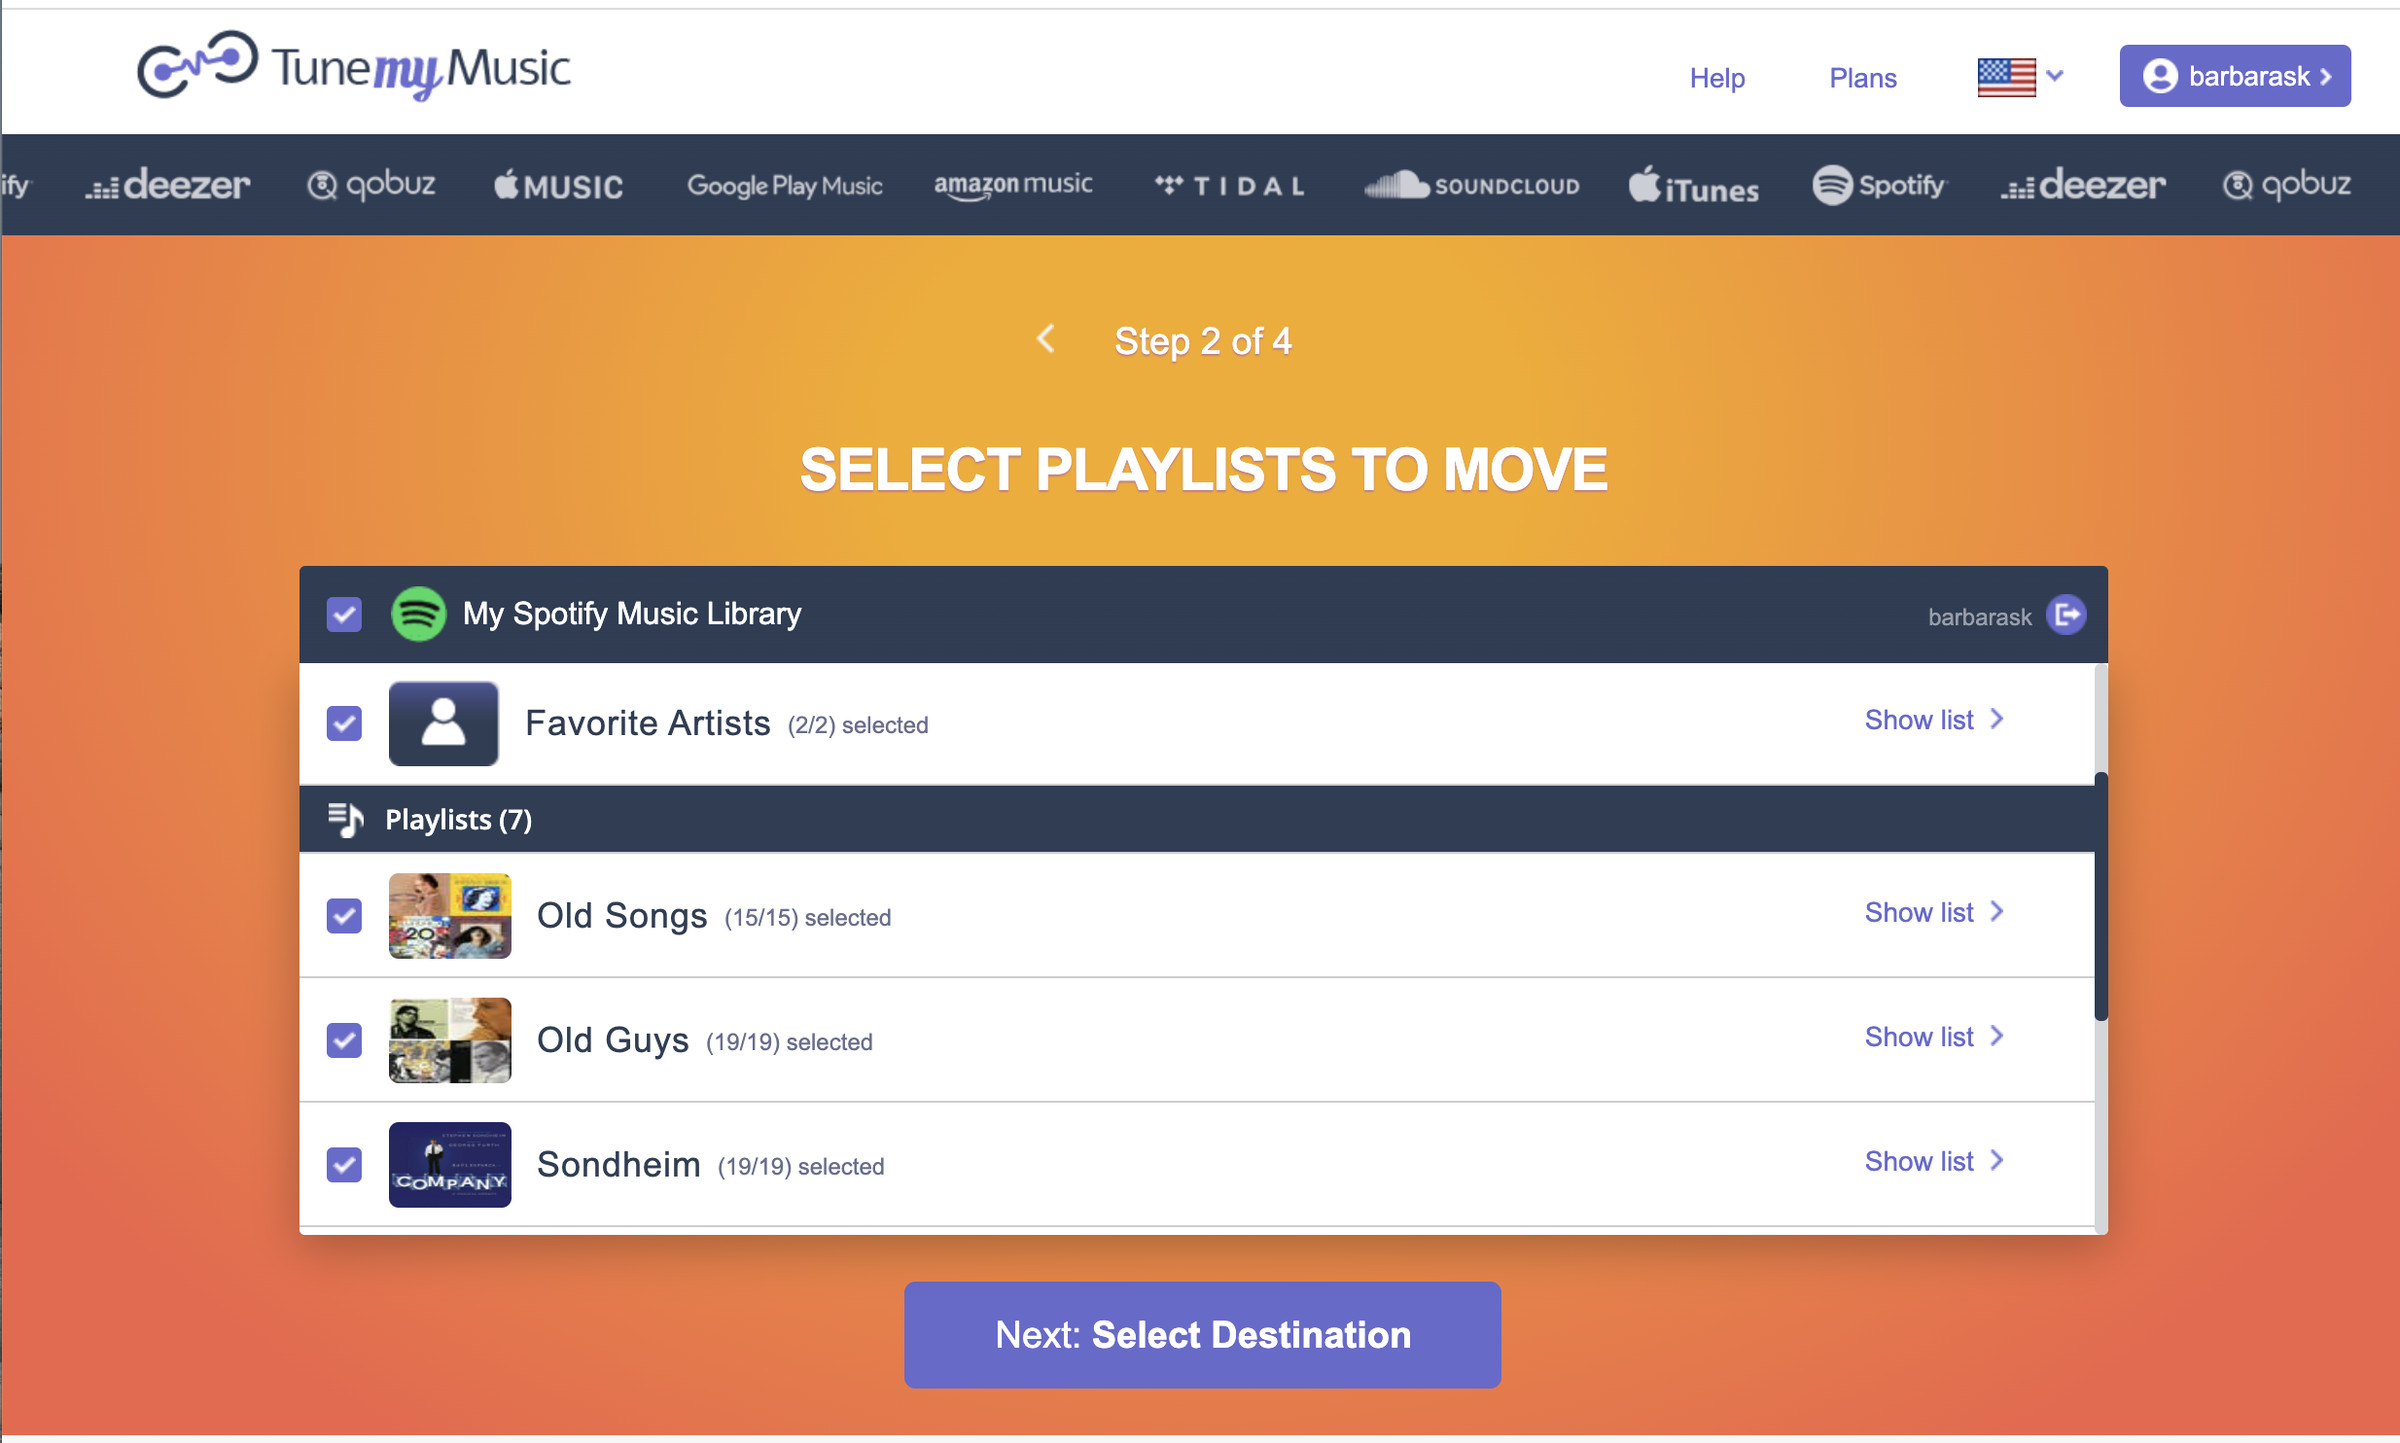 Select which playlists you want to move.